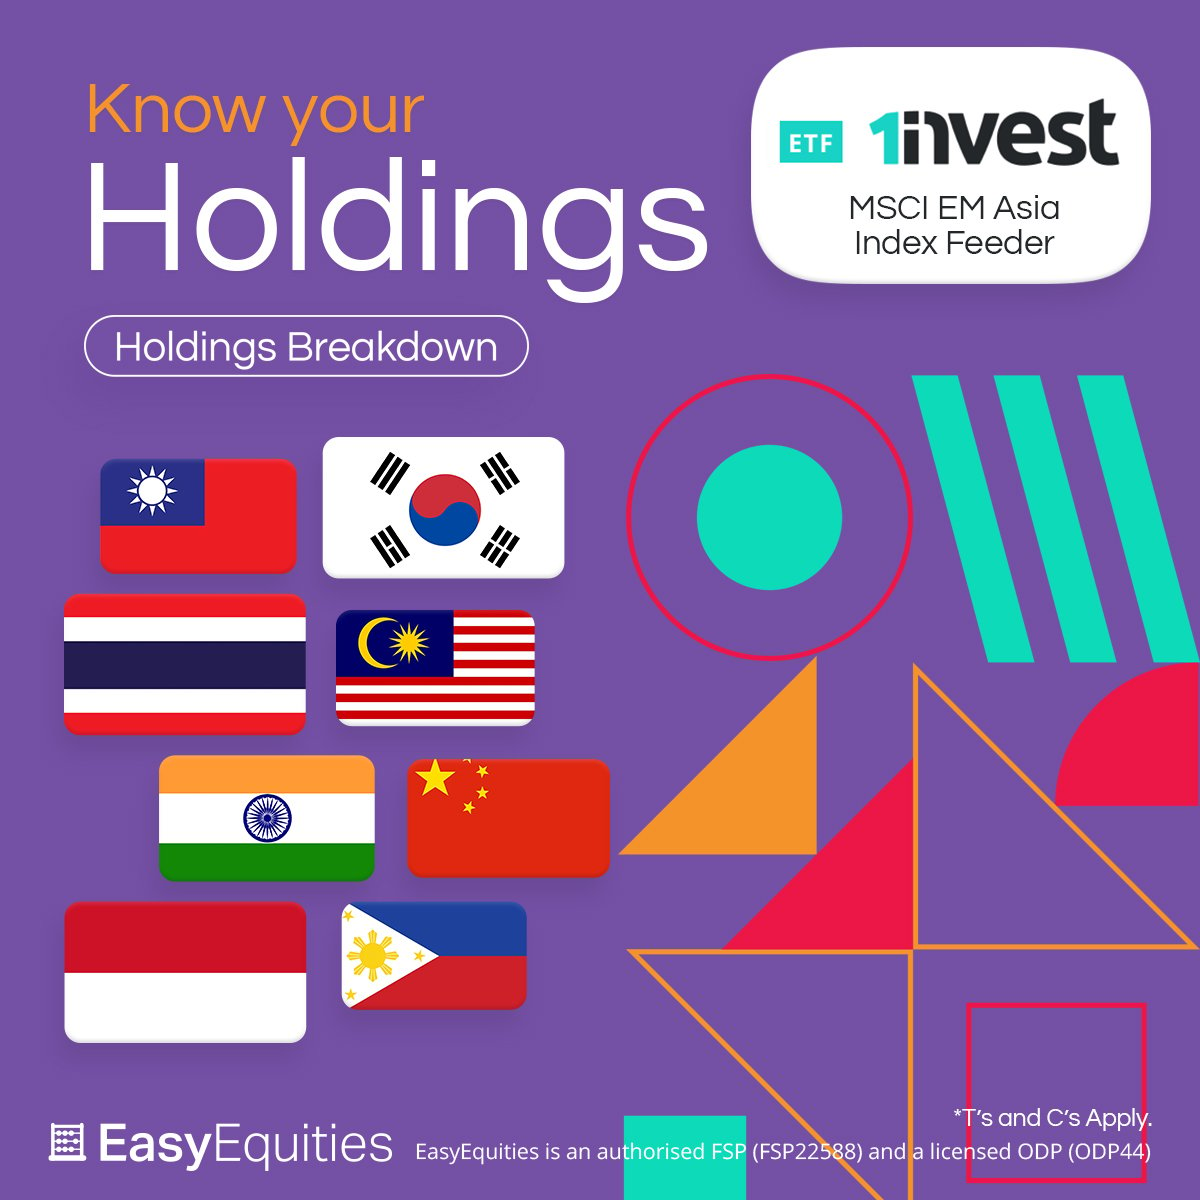 know your holdings 1invest Square